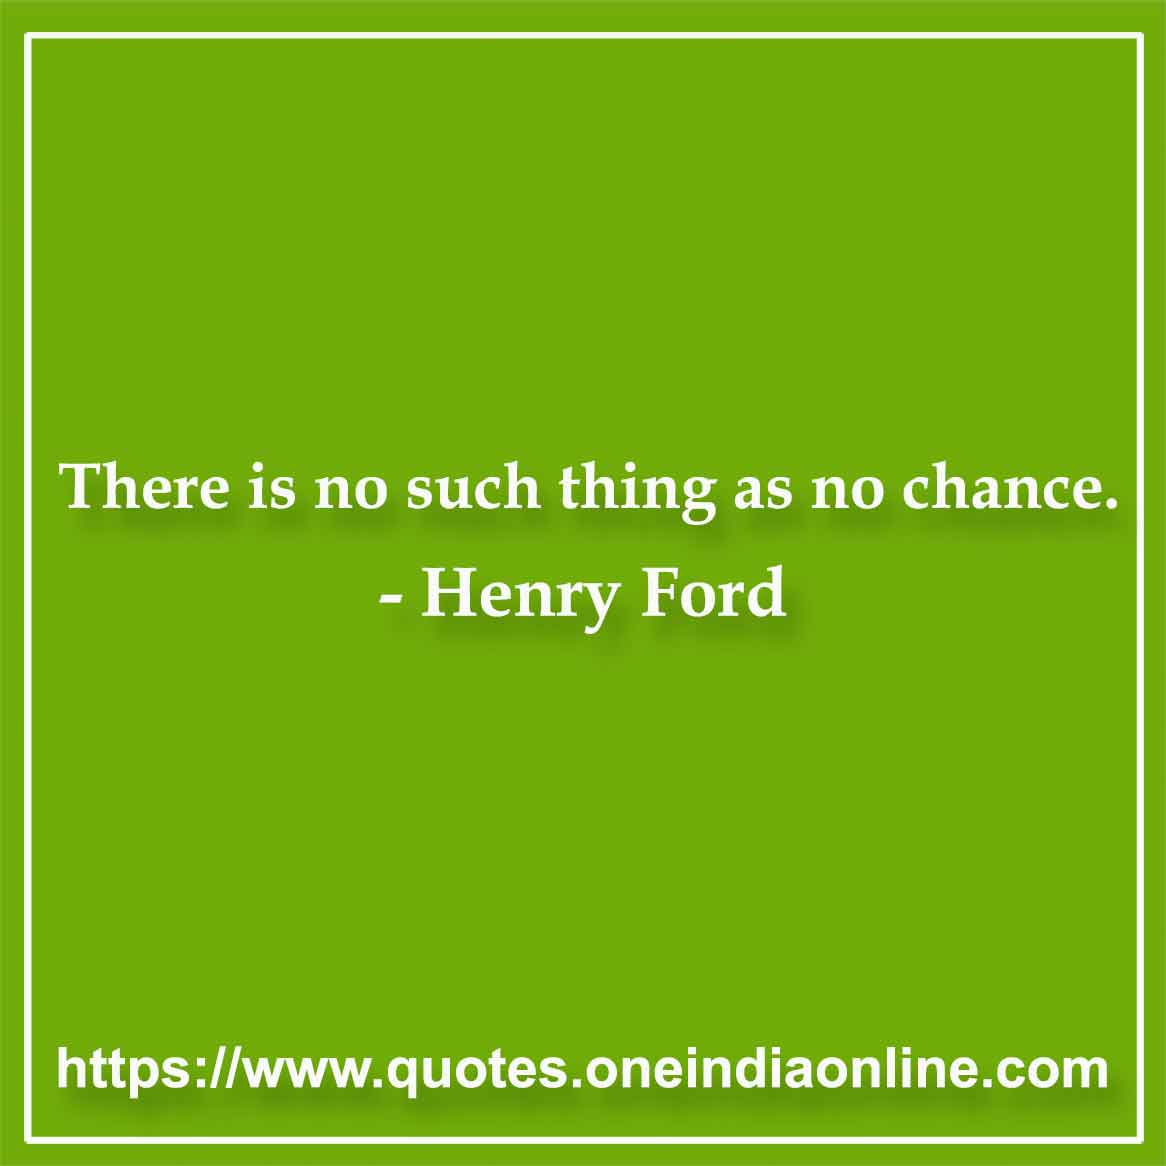 There is no such thing as no chance. 

- Henry Ford